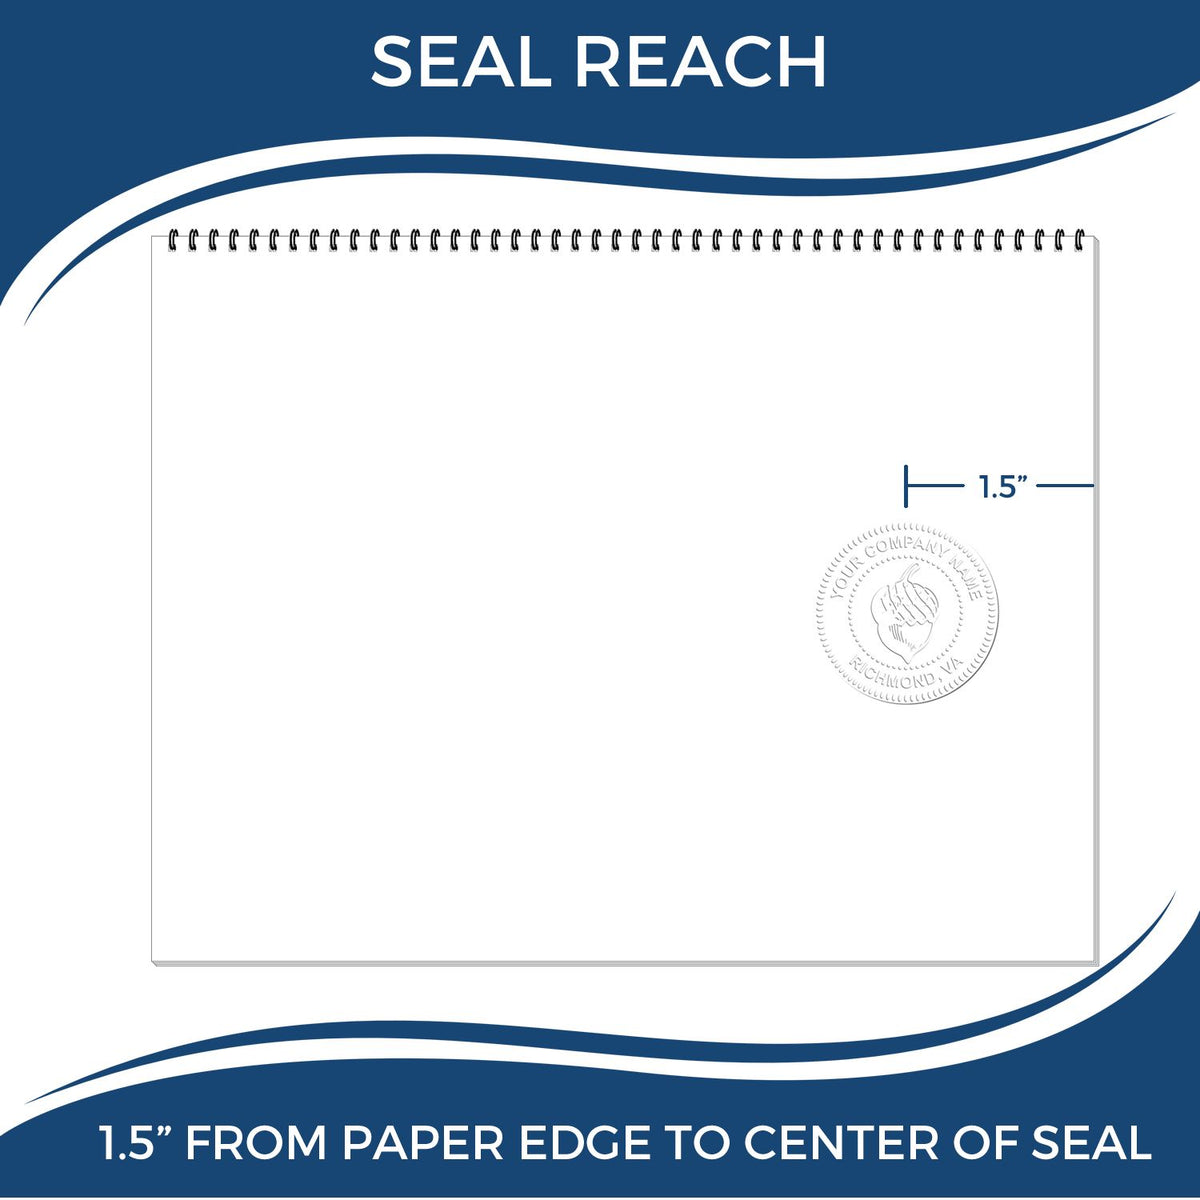 An infographic showing the seal reach which is represented by a ruler and a miniature seal image of the Vermont Engineer Desk Seal